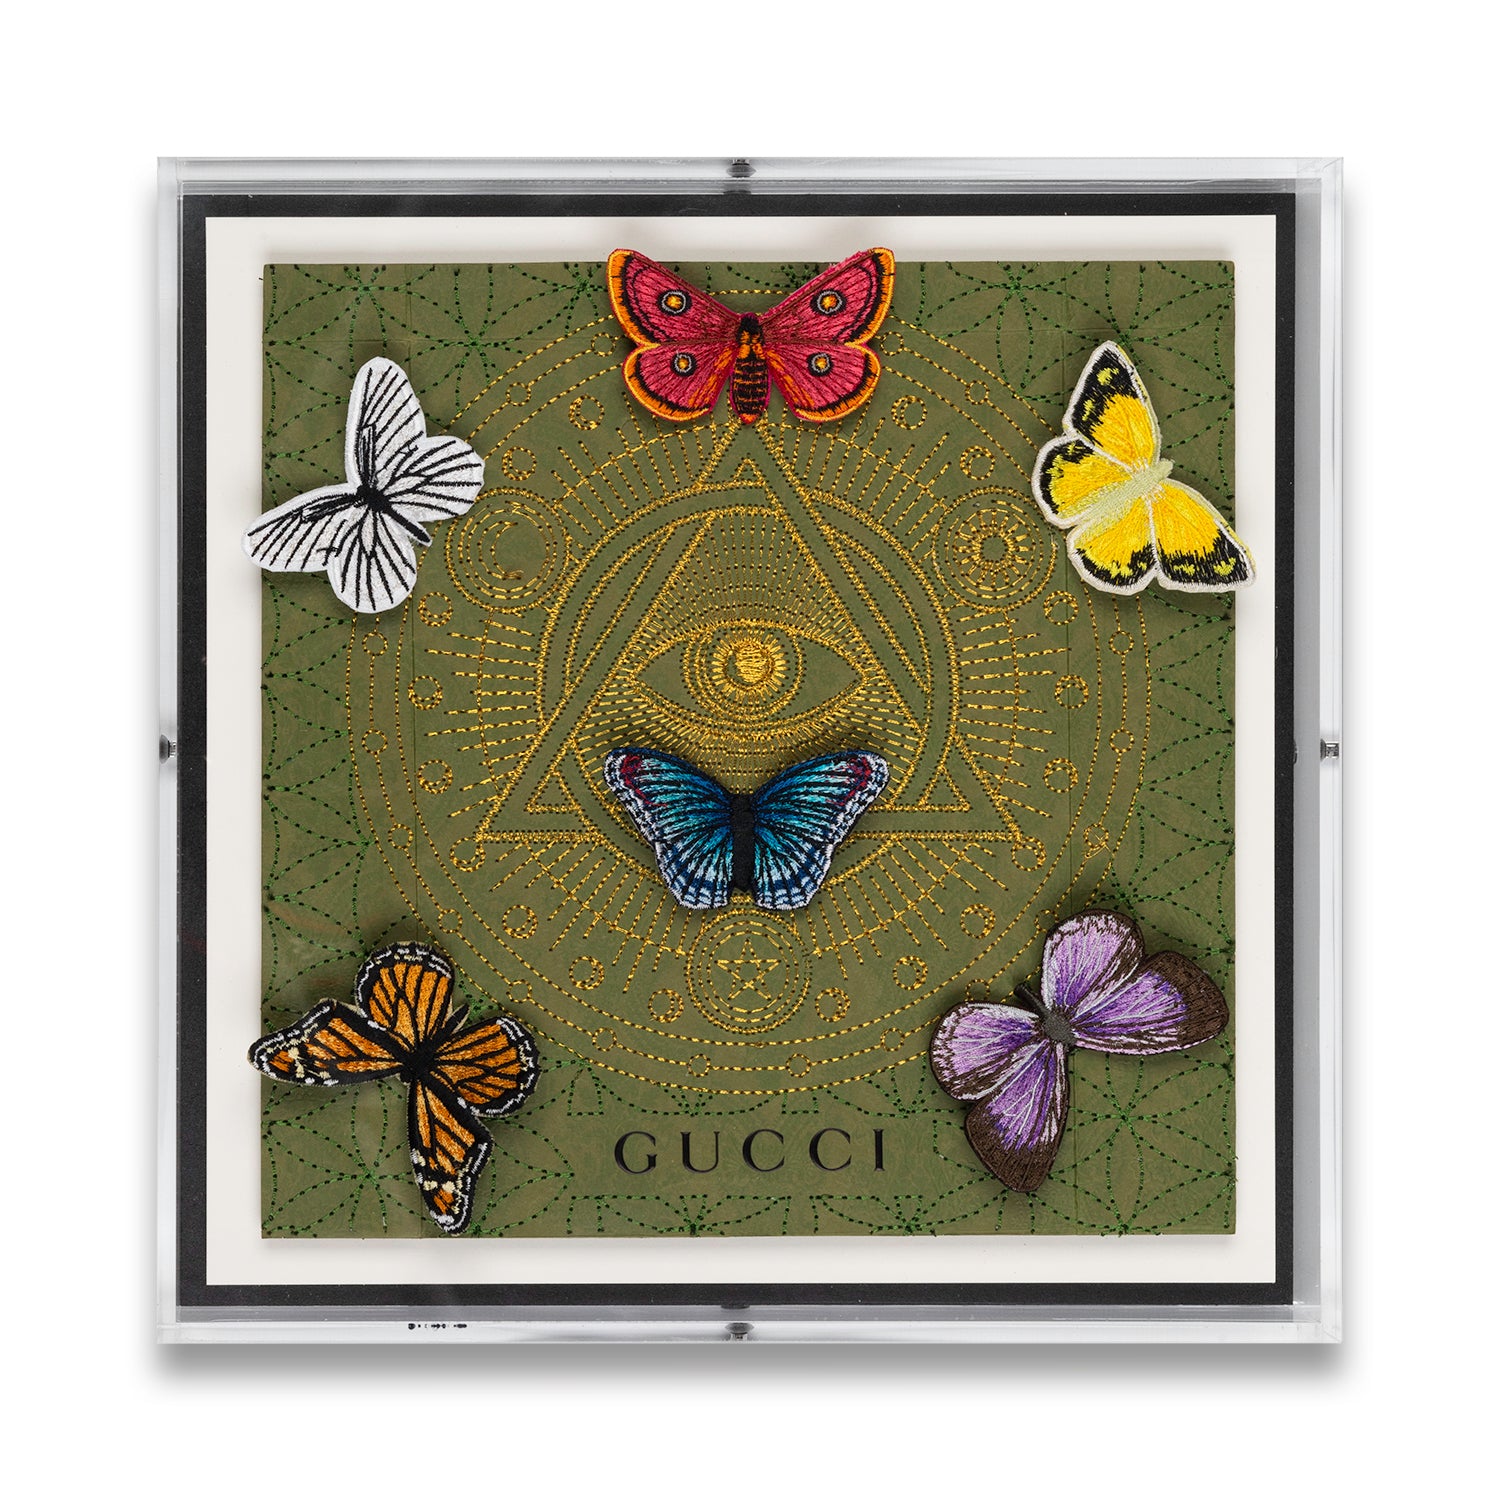 Gucci Eye of Providence by Stephen Wilson 12x12x2